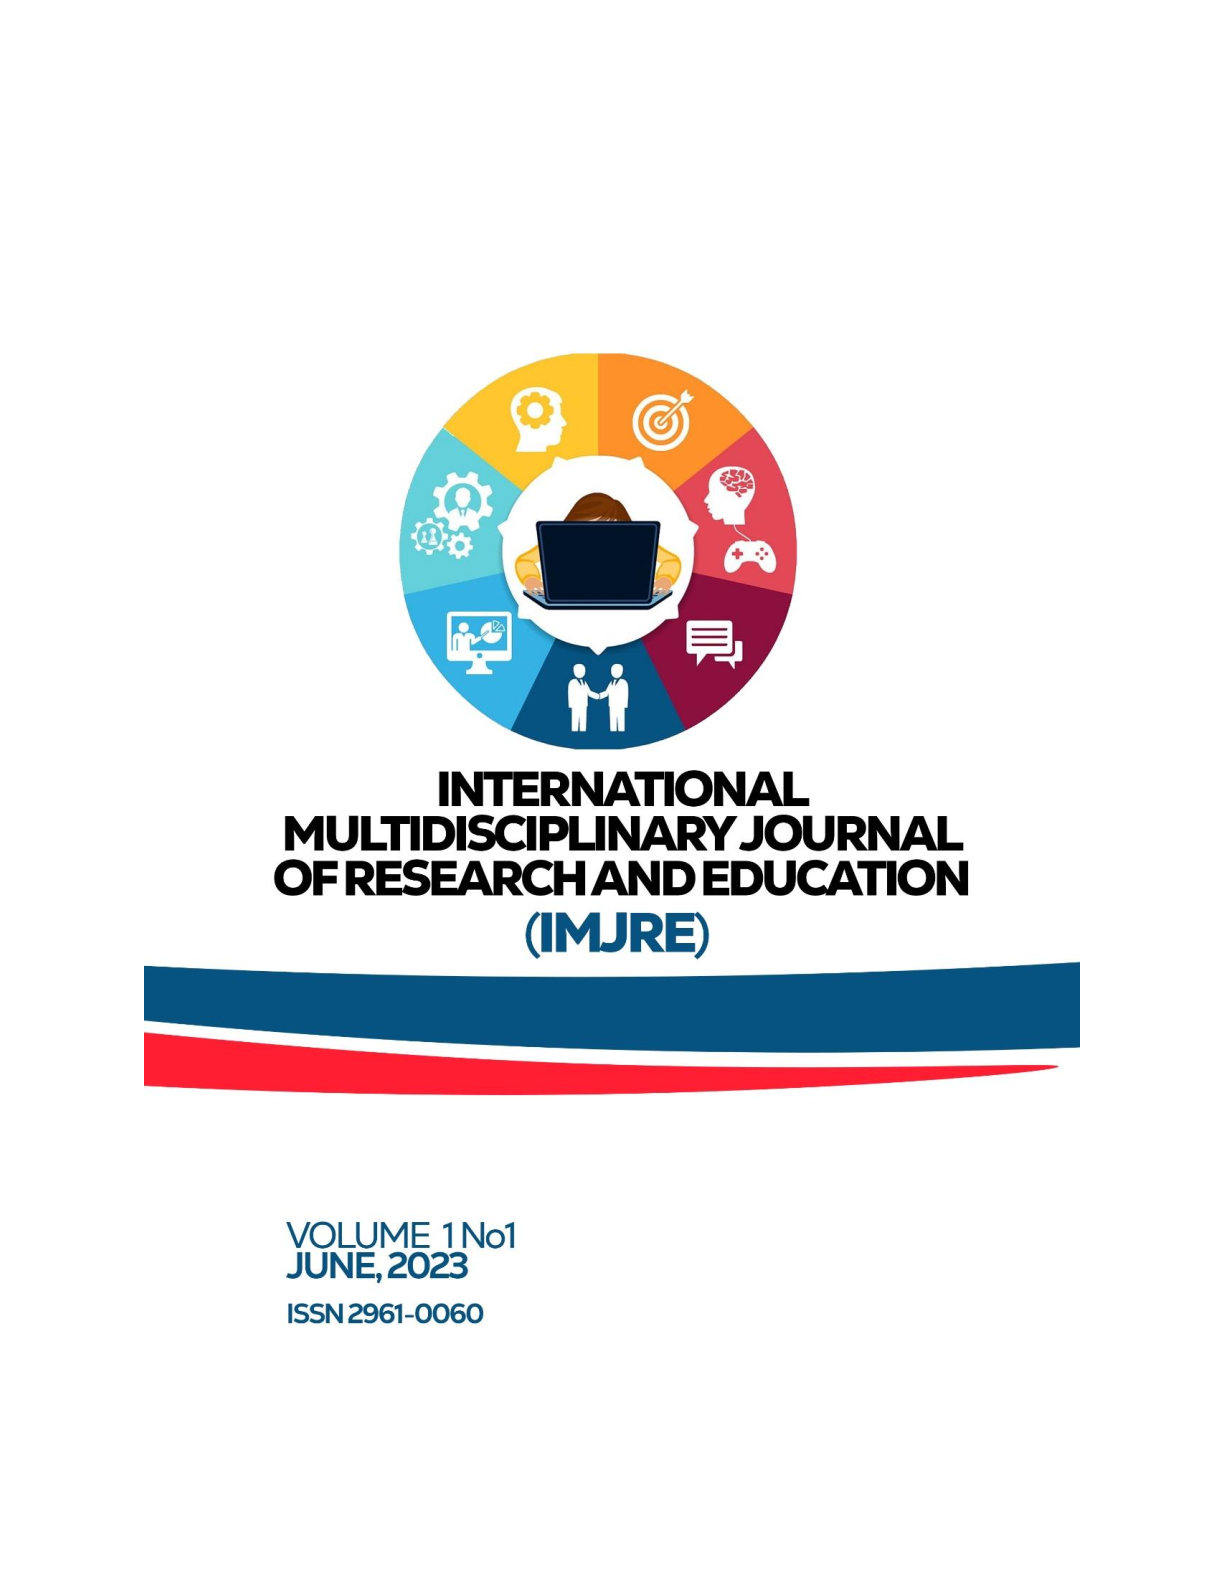 INTERNATIONAL MULTIDISCIPLINARY JOURNAL OF RESEARCH AND EDUCATION